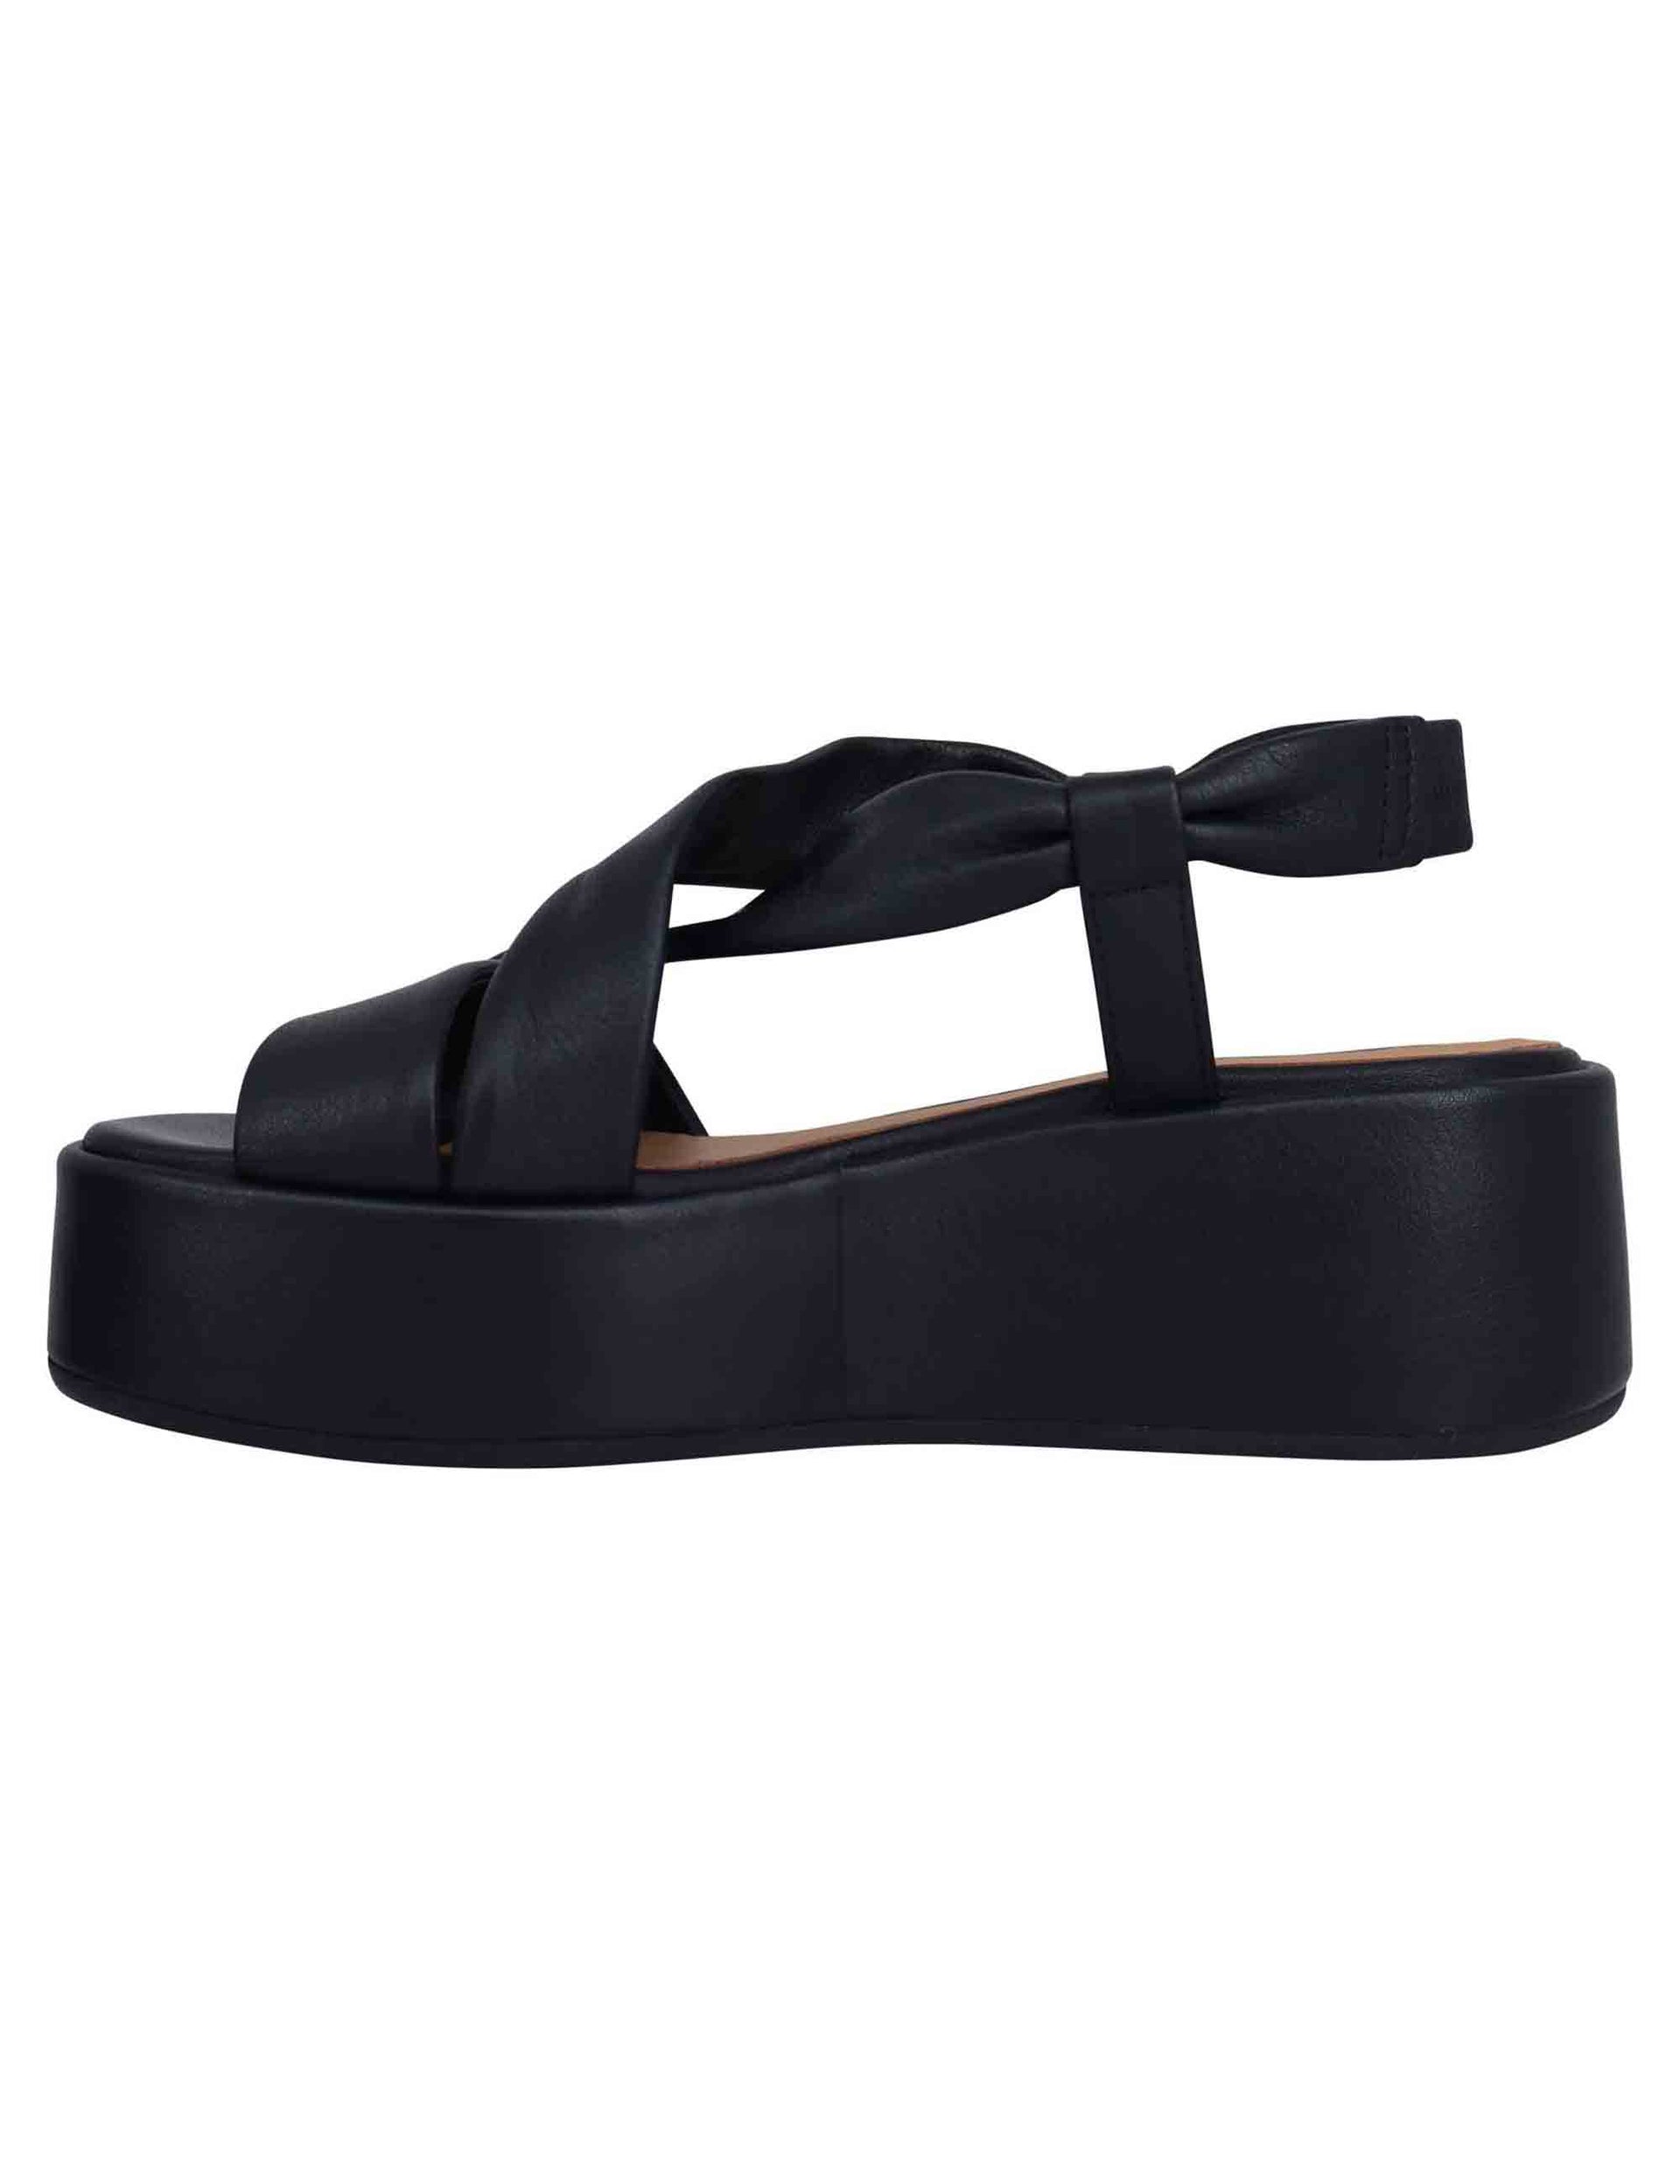 Women's black leather sandals with matching banded wedge